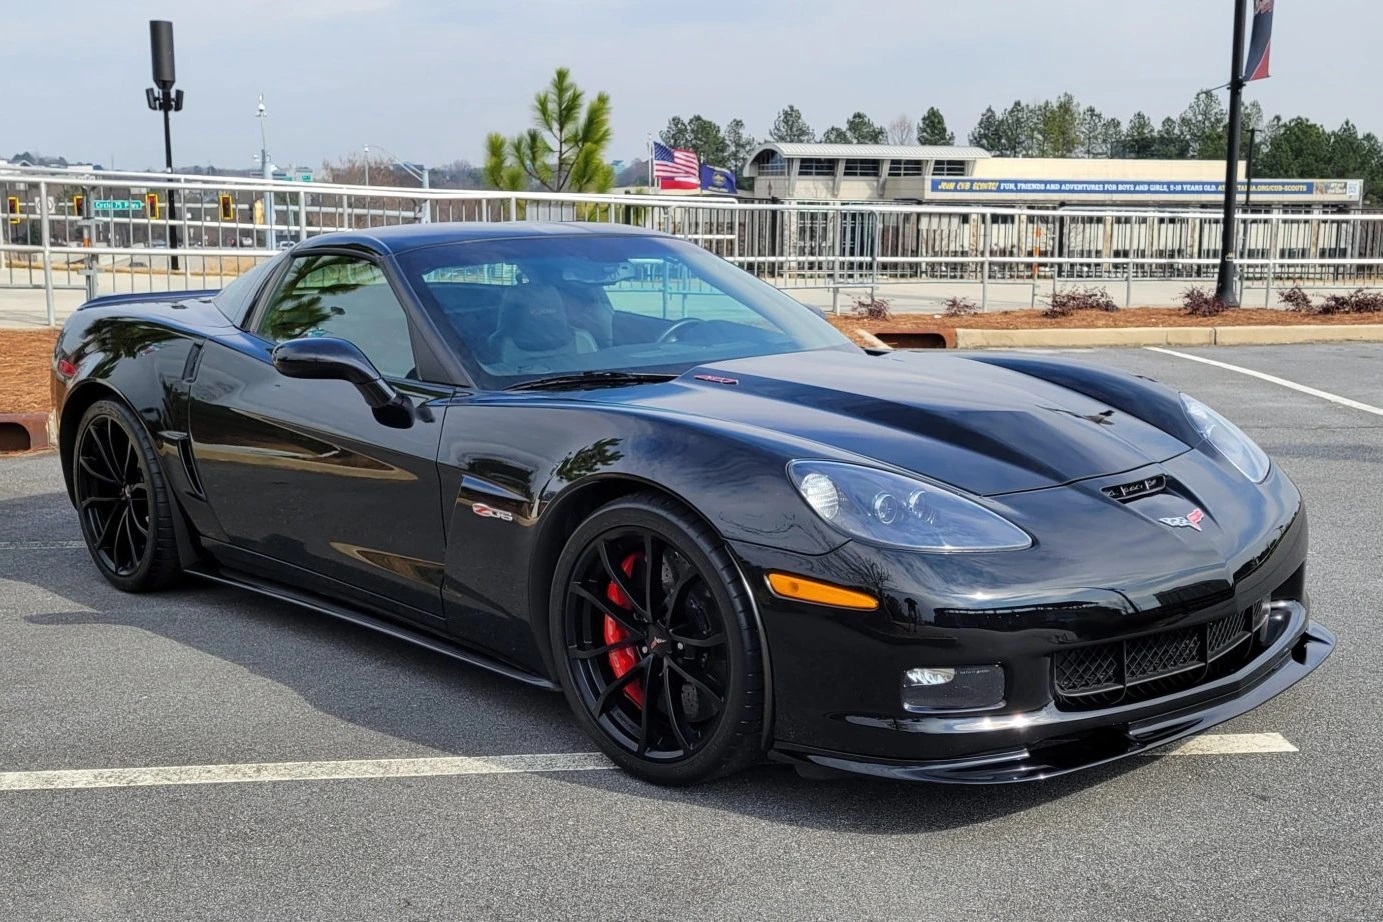 Corvette C6 Z06 with Z07 package